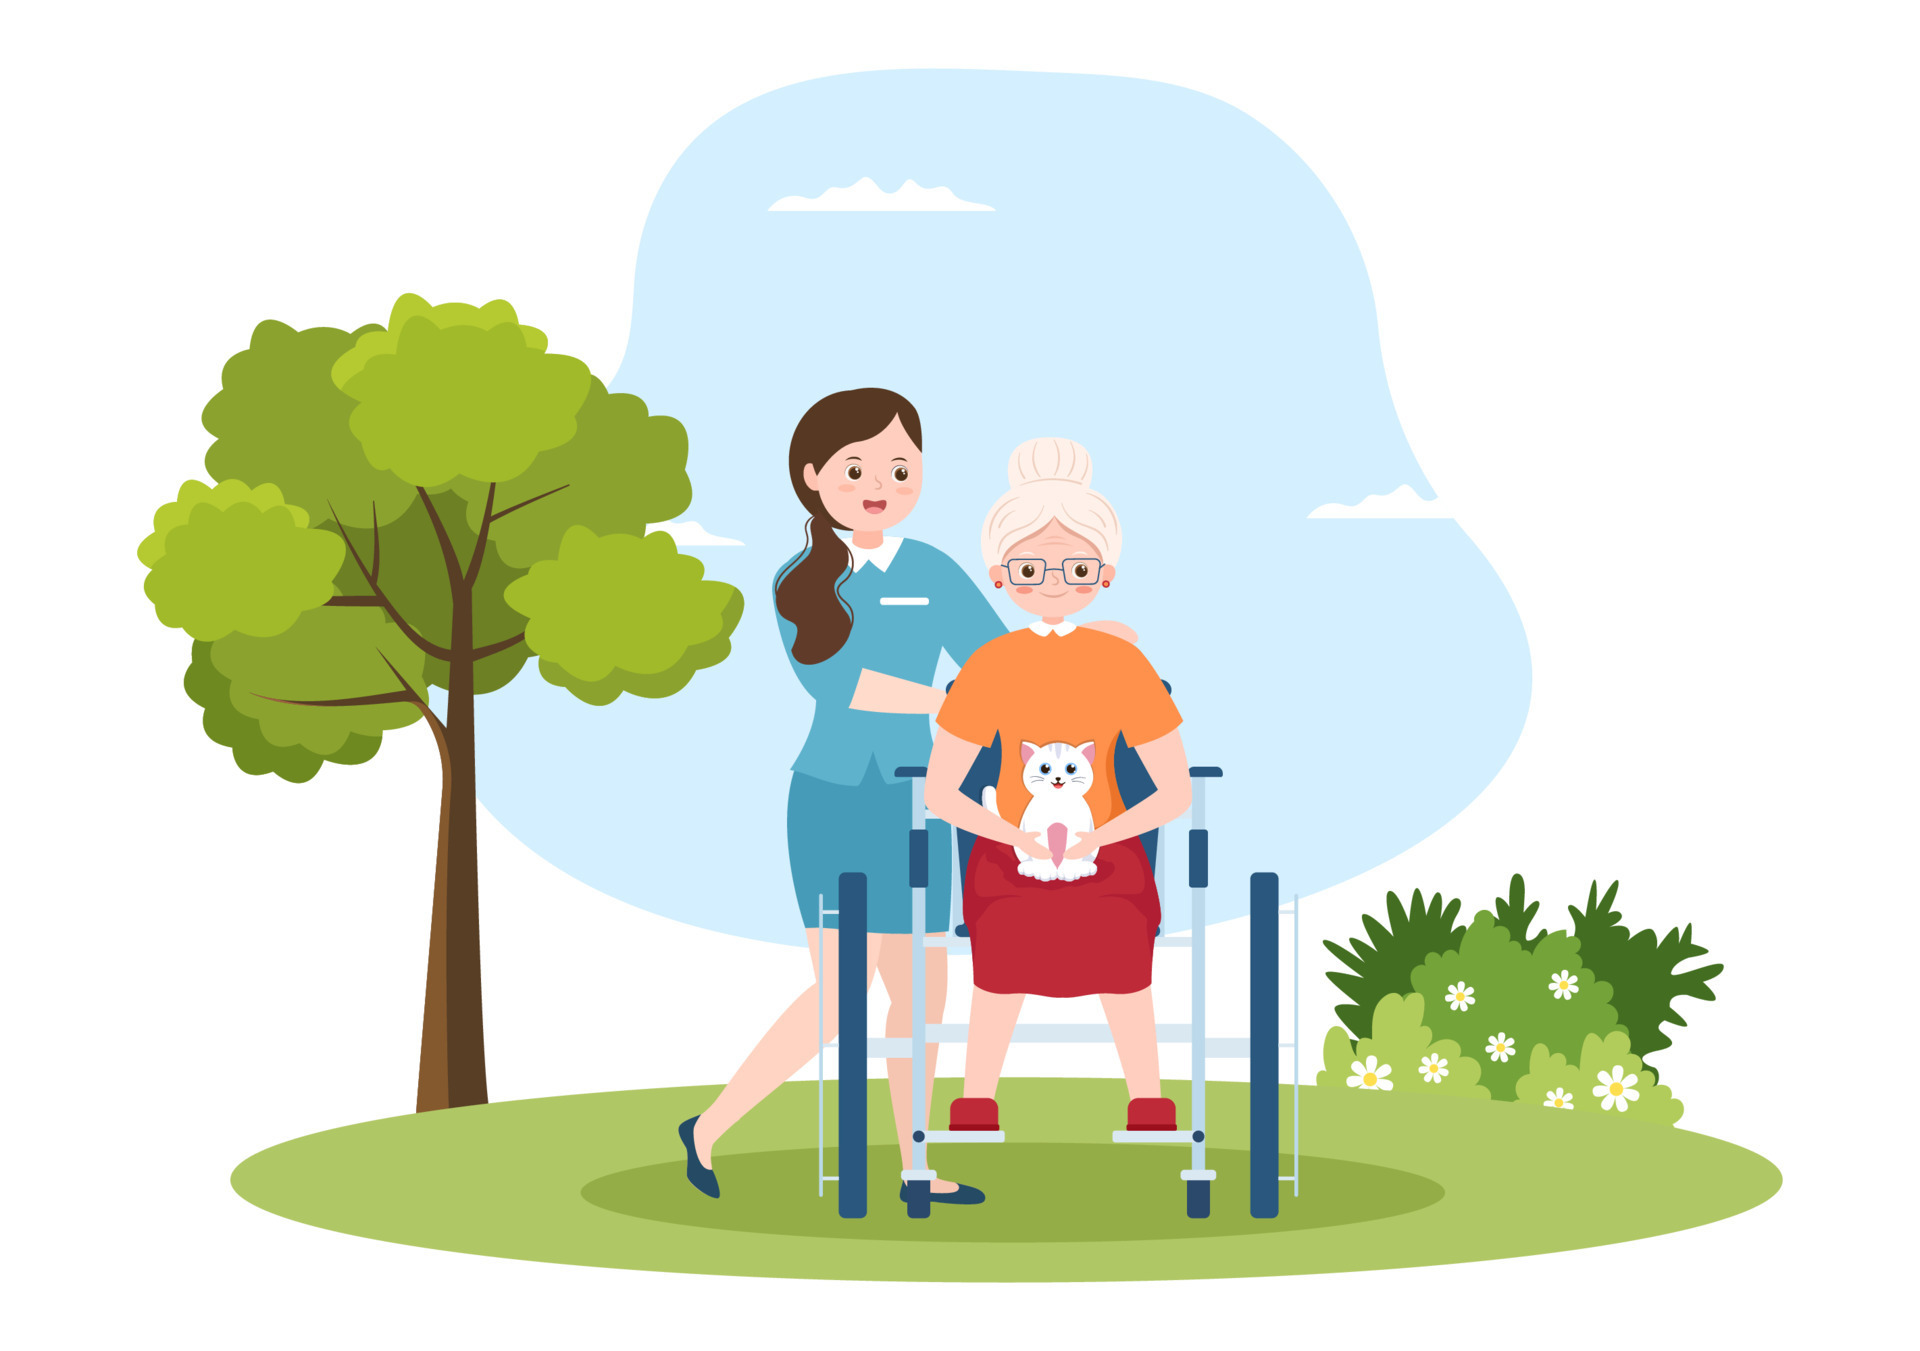 Elderly Care Services Hand Drawn Cartoon Flat Illustration With Caregiver Nursing Home Assisted Living And Support Design Vector